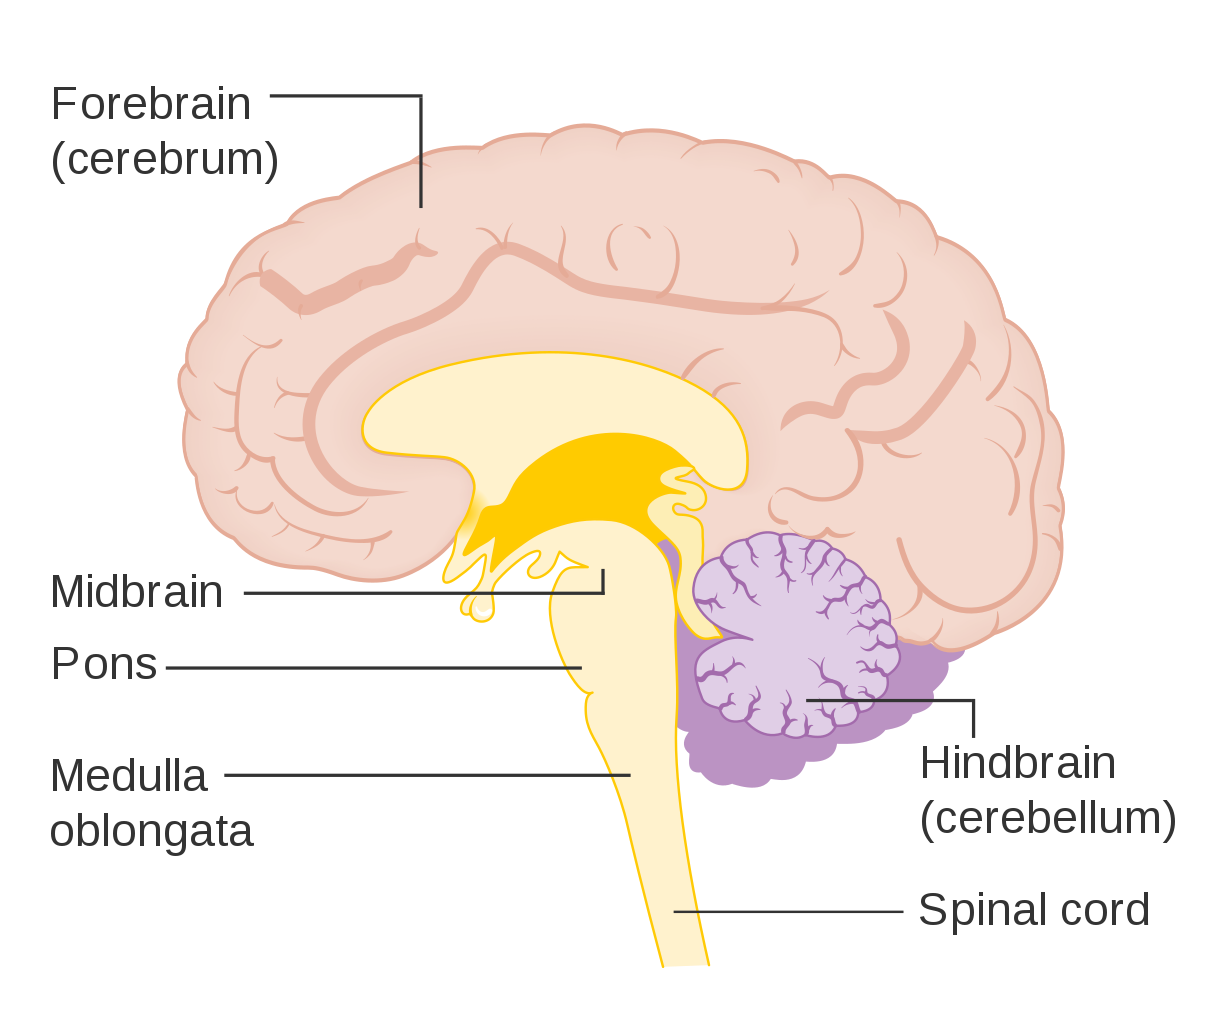 This illustration shows a midsection of the human brain cut in the sagittal plane. Highlighted are the main divisions of the brain, brainstem, and spinal cord. This includes the Forebrain, cerebrum, midbrain, pons, medulla, hindbrain, cerebellum, and spinal cord.